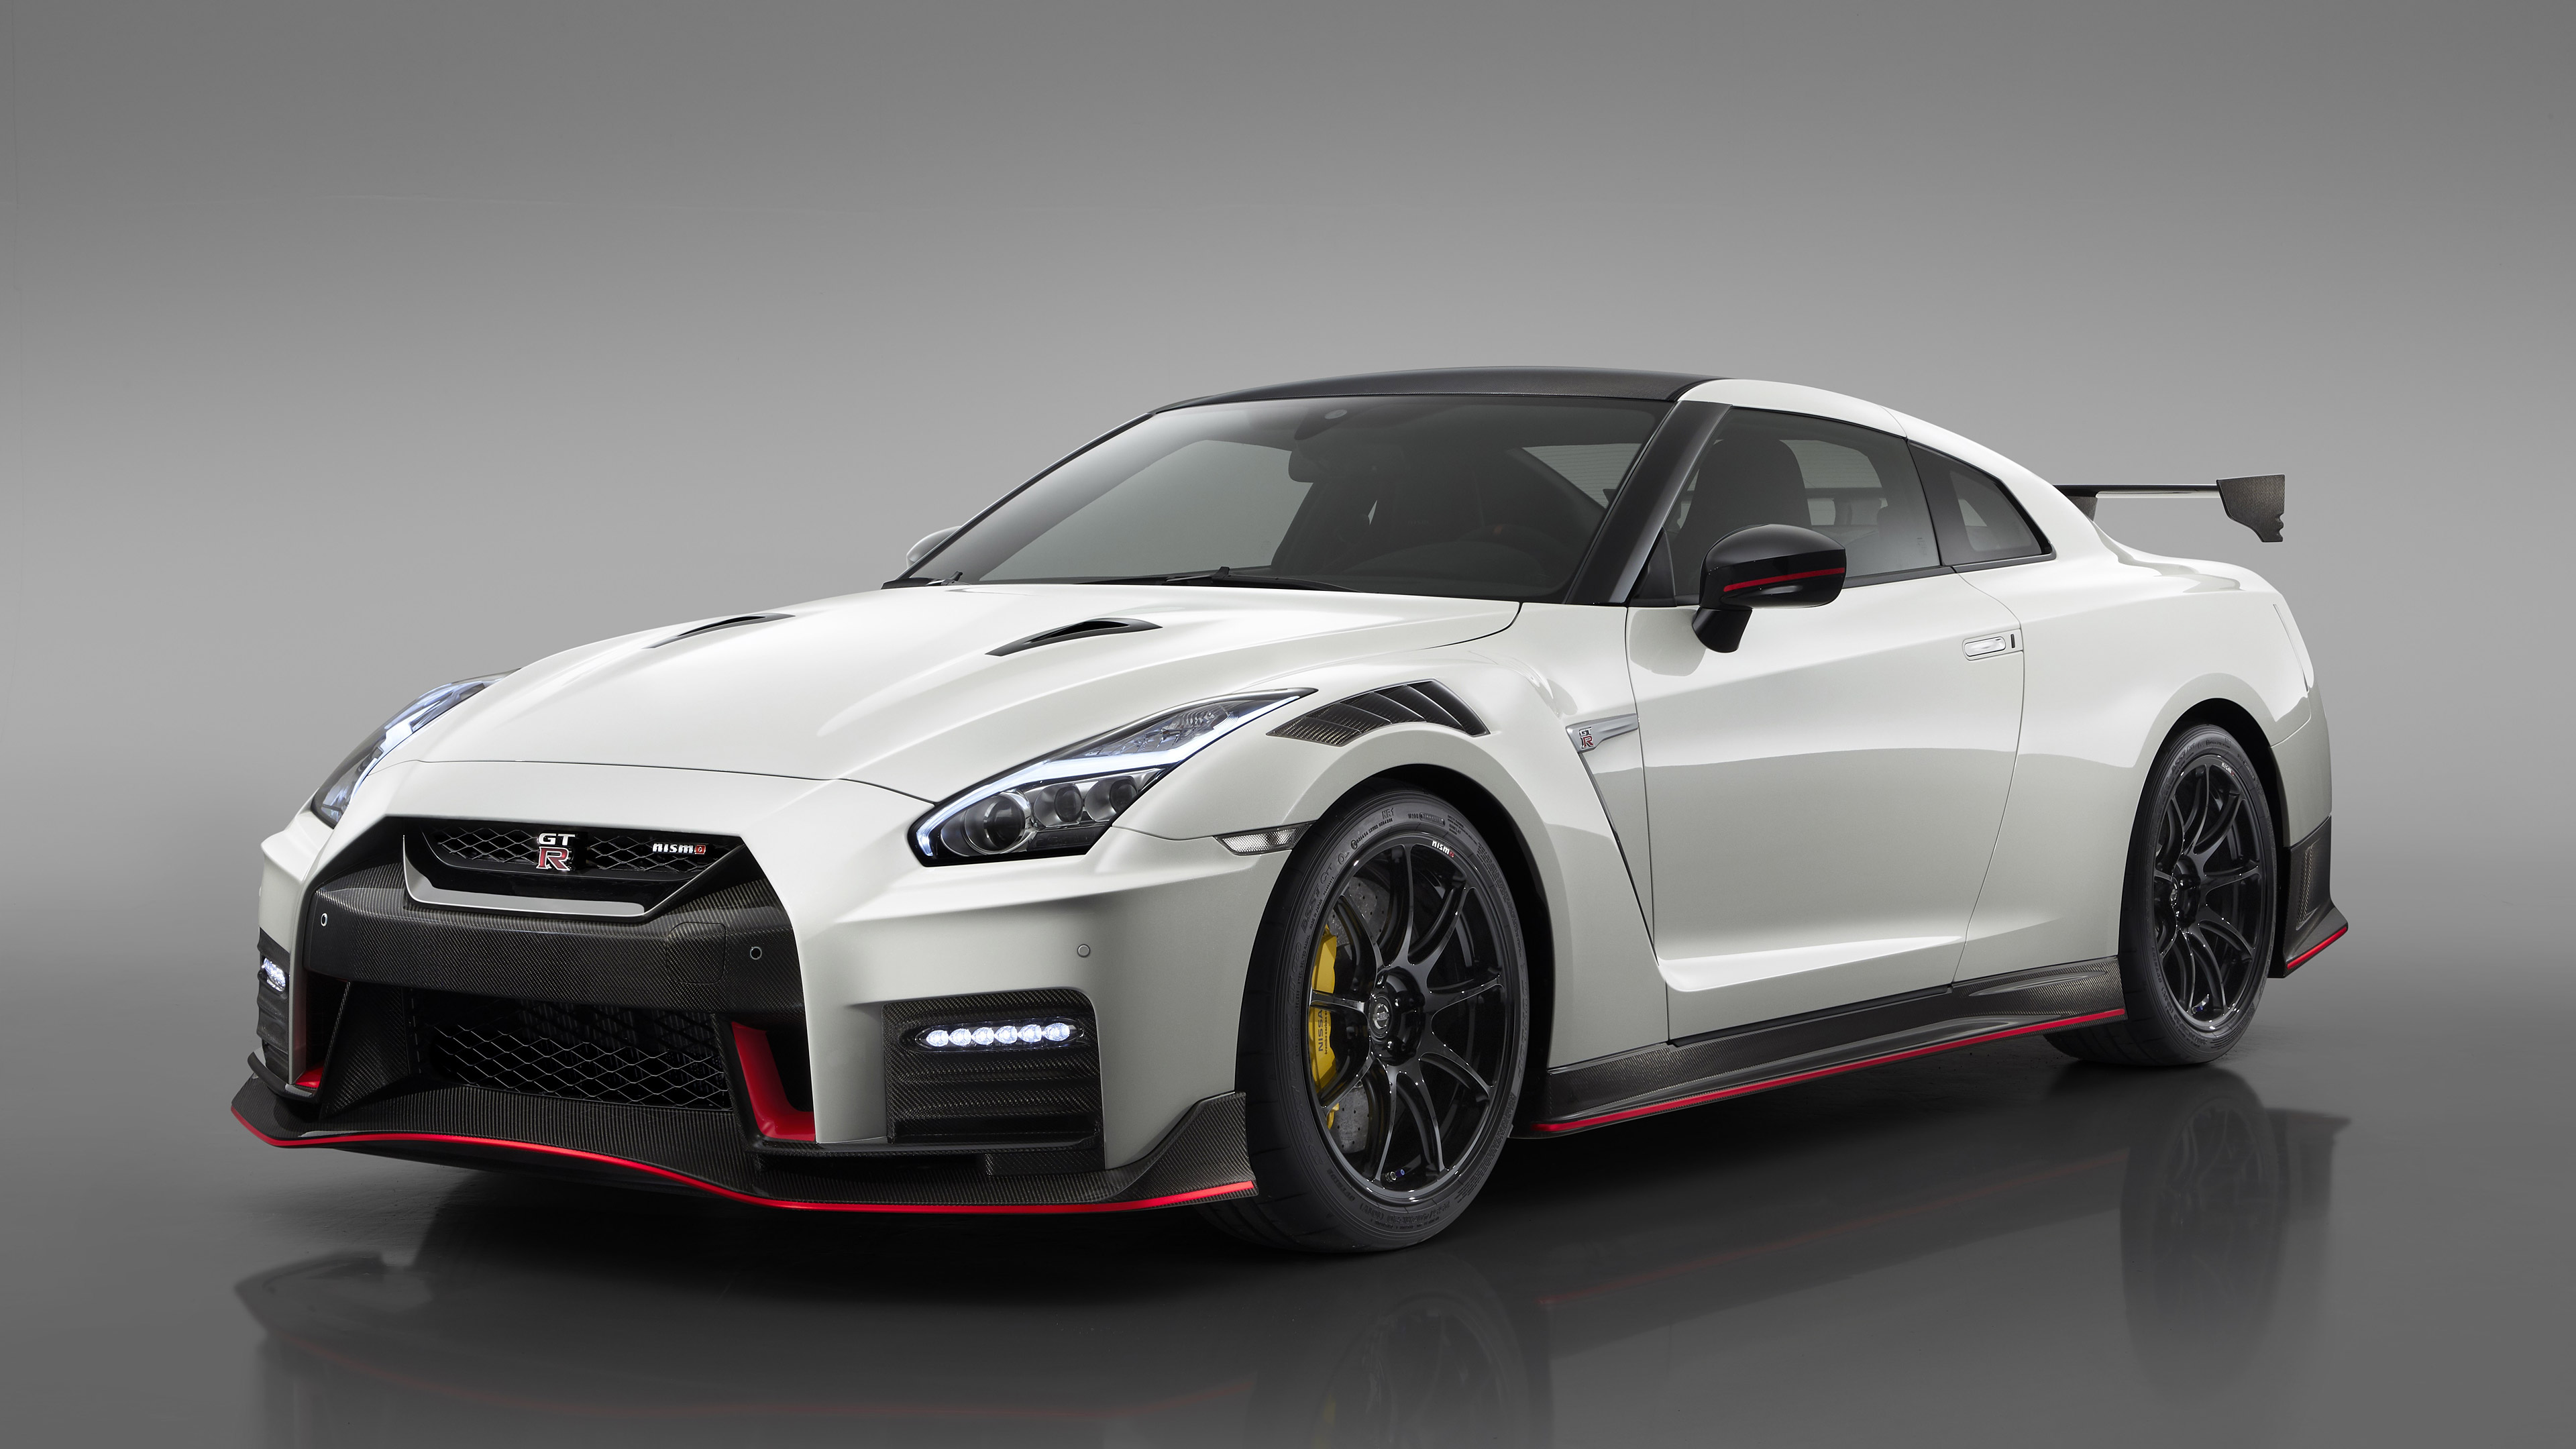 General 3840x2160 Nissan GT-R NISMO car vehicle supercars Nismo simple background